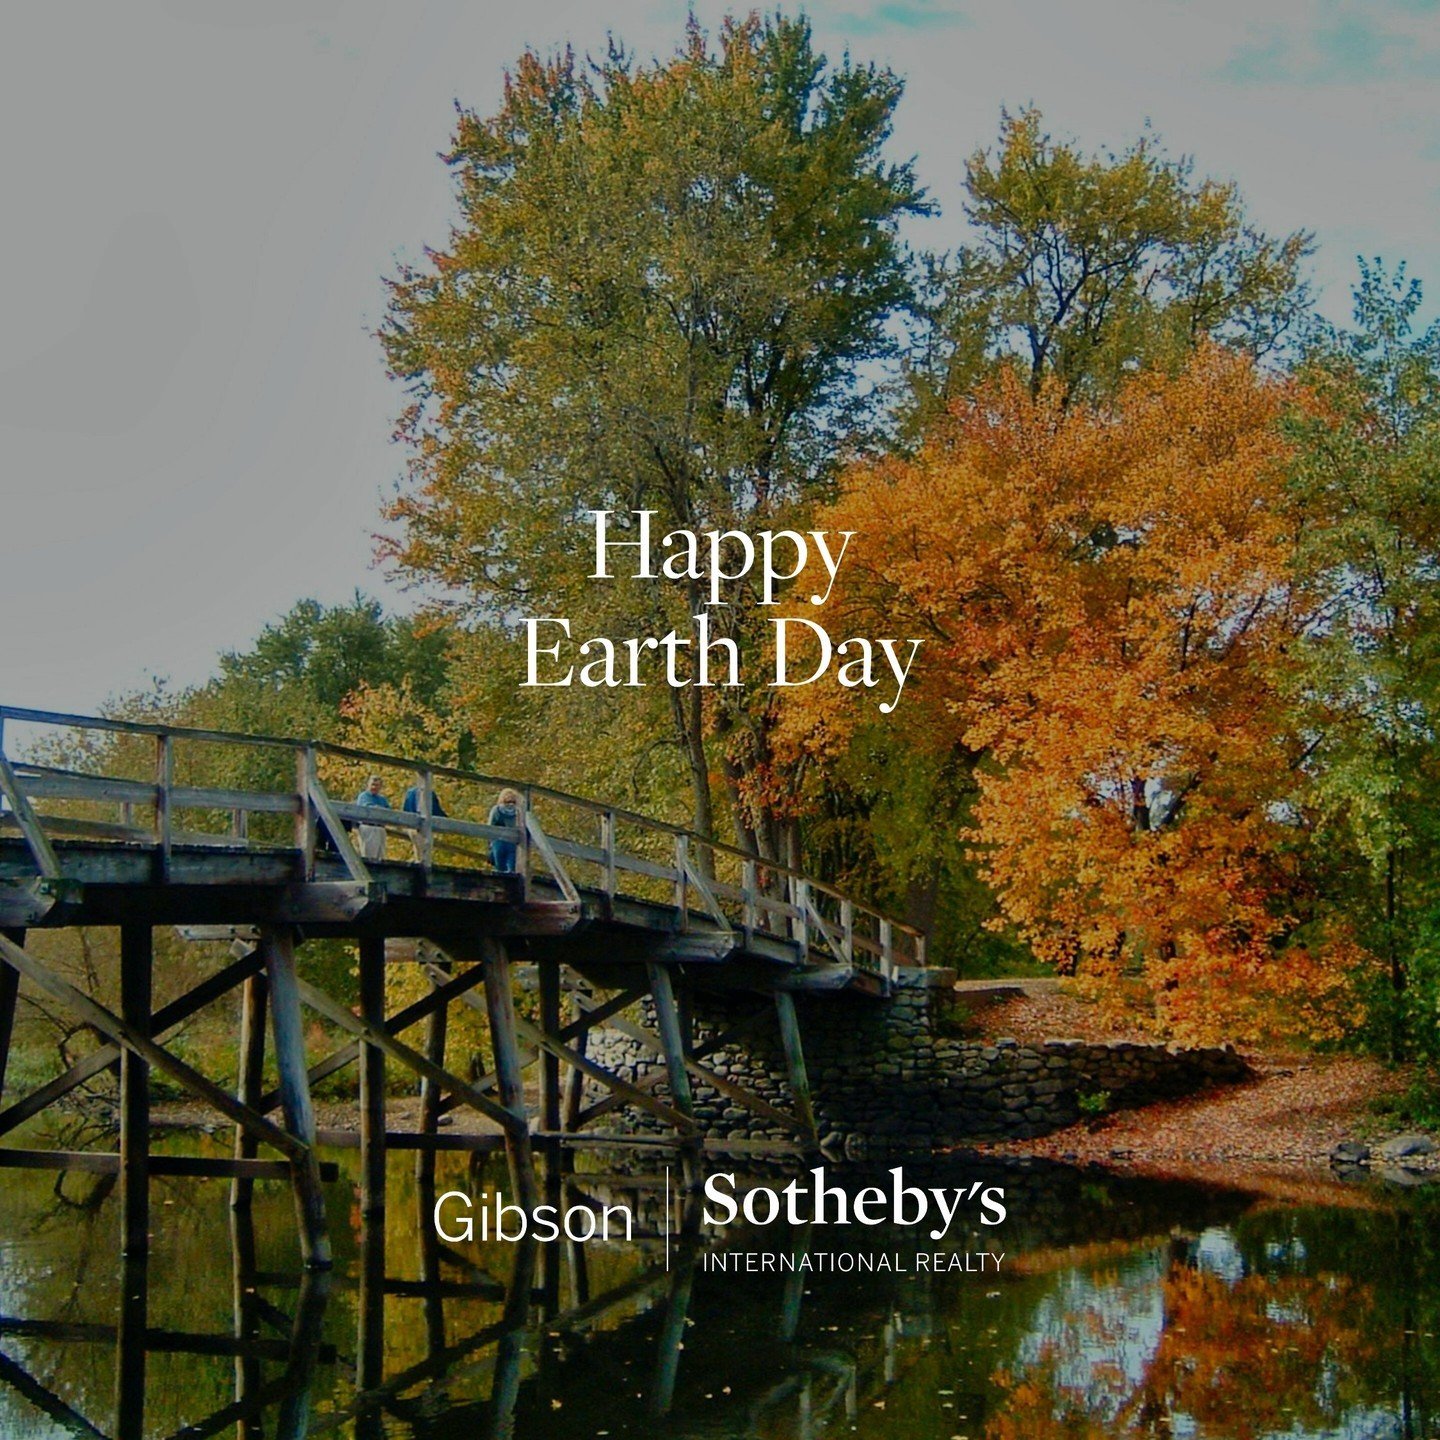 Happy Earth Day! Let's celebrate our beautiful planet and remember that every small action counts in preserving its beauty and sustainability.